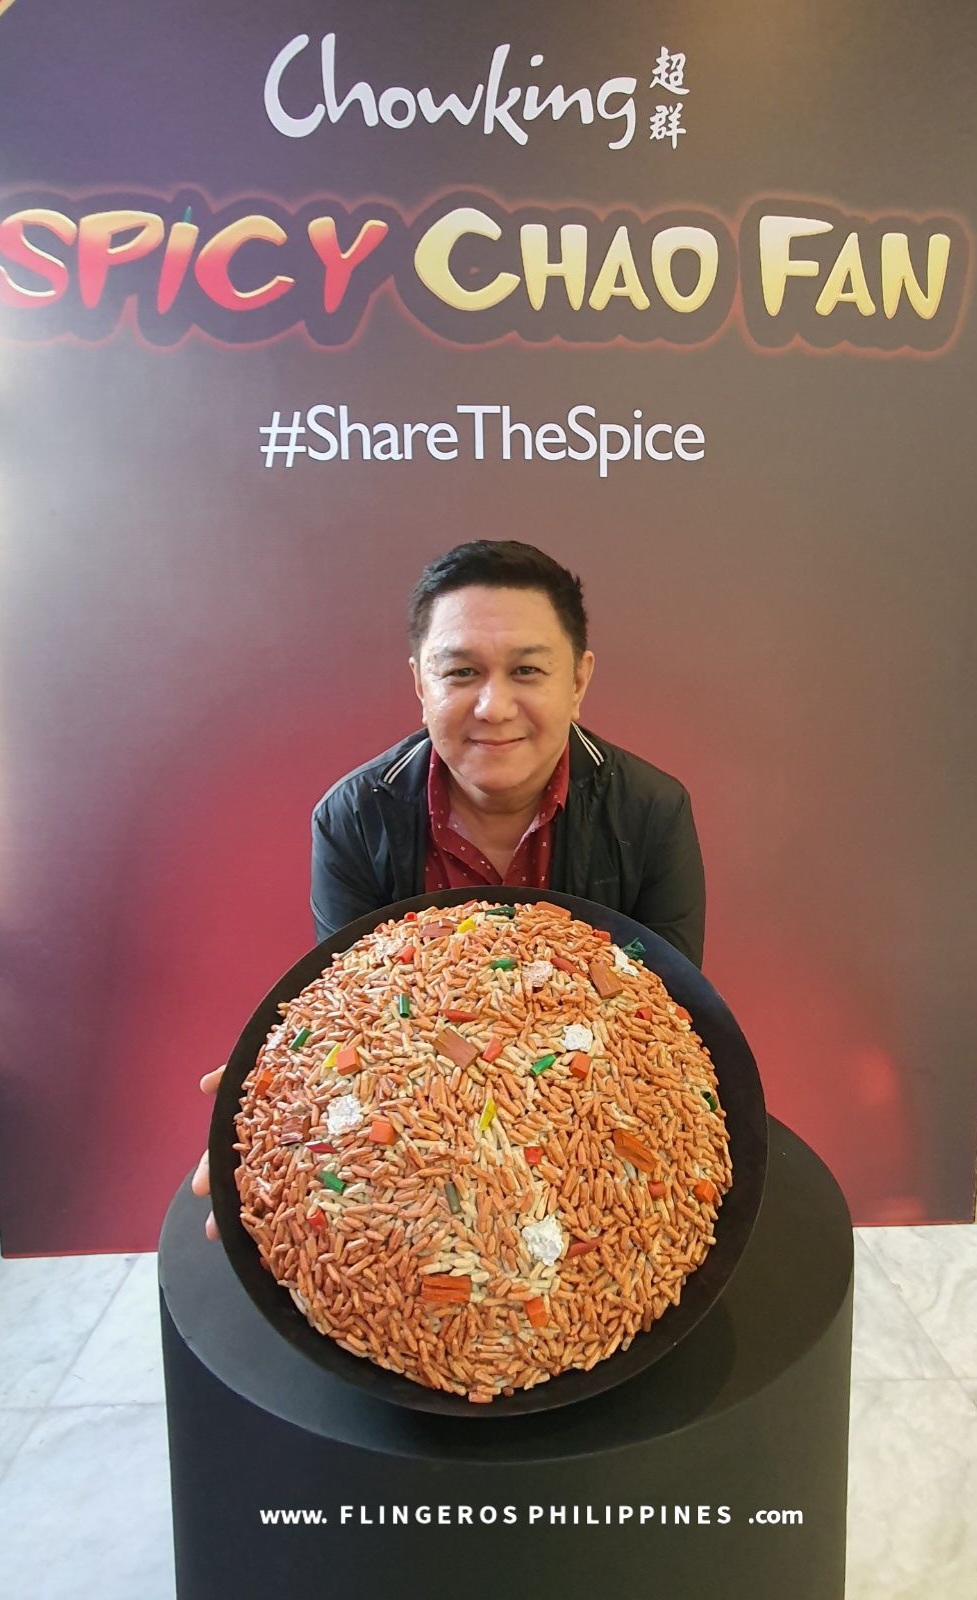 I have joined the #ShareTheSpice movement and loving the new Spicy Chao Fan!